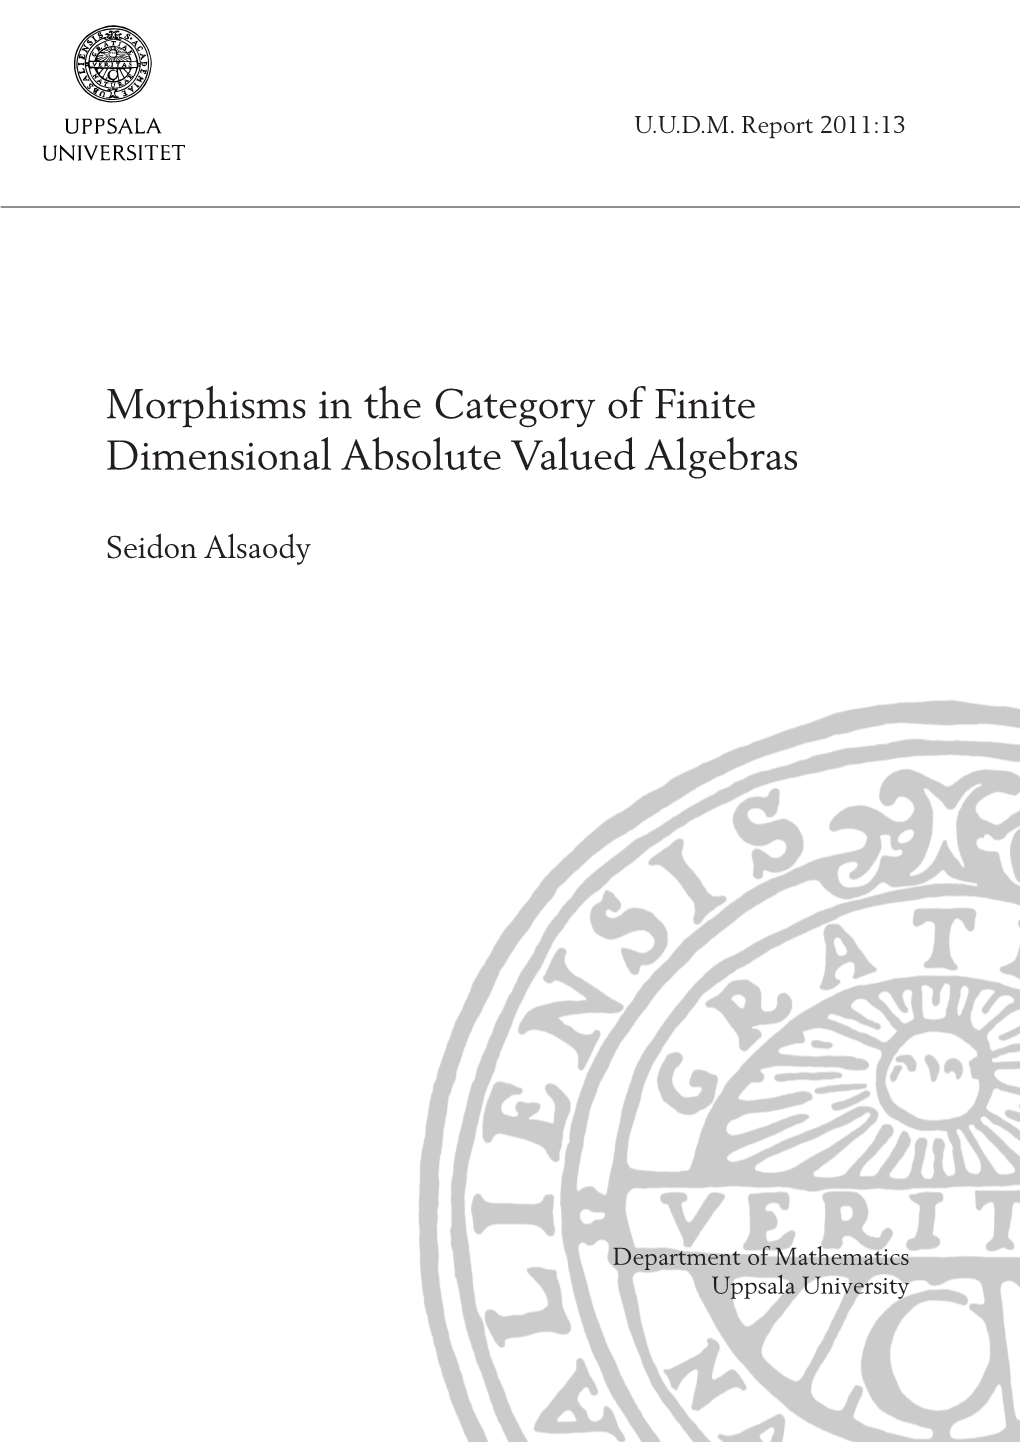 Morphisms in the Category of Finite Dimensional Absolute Valued Algebras